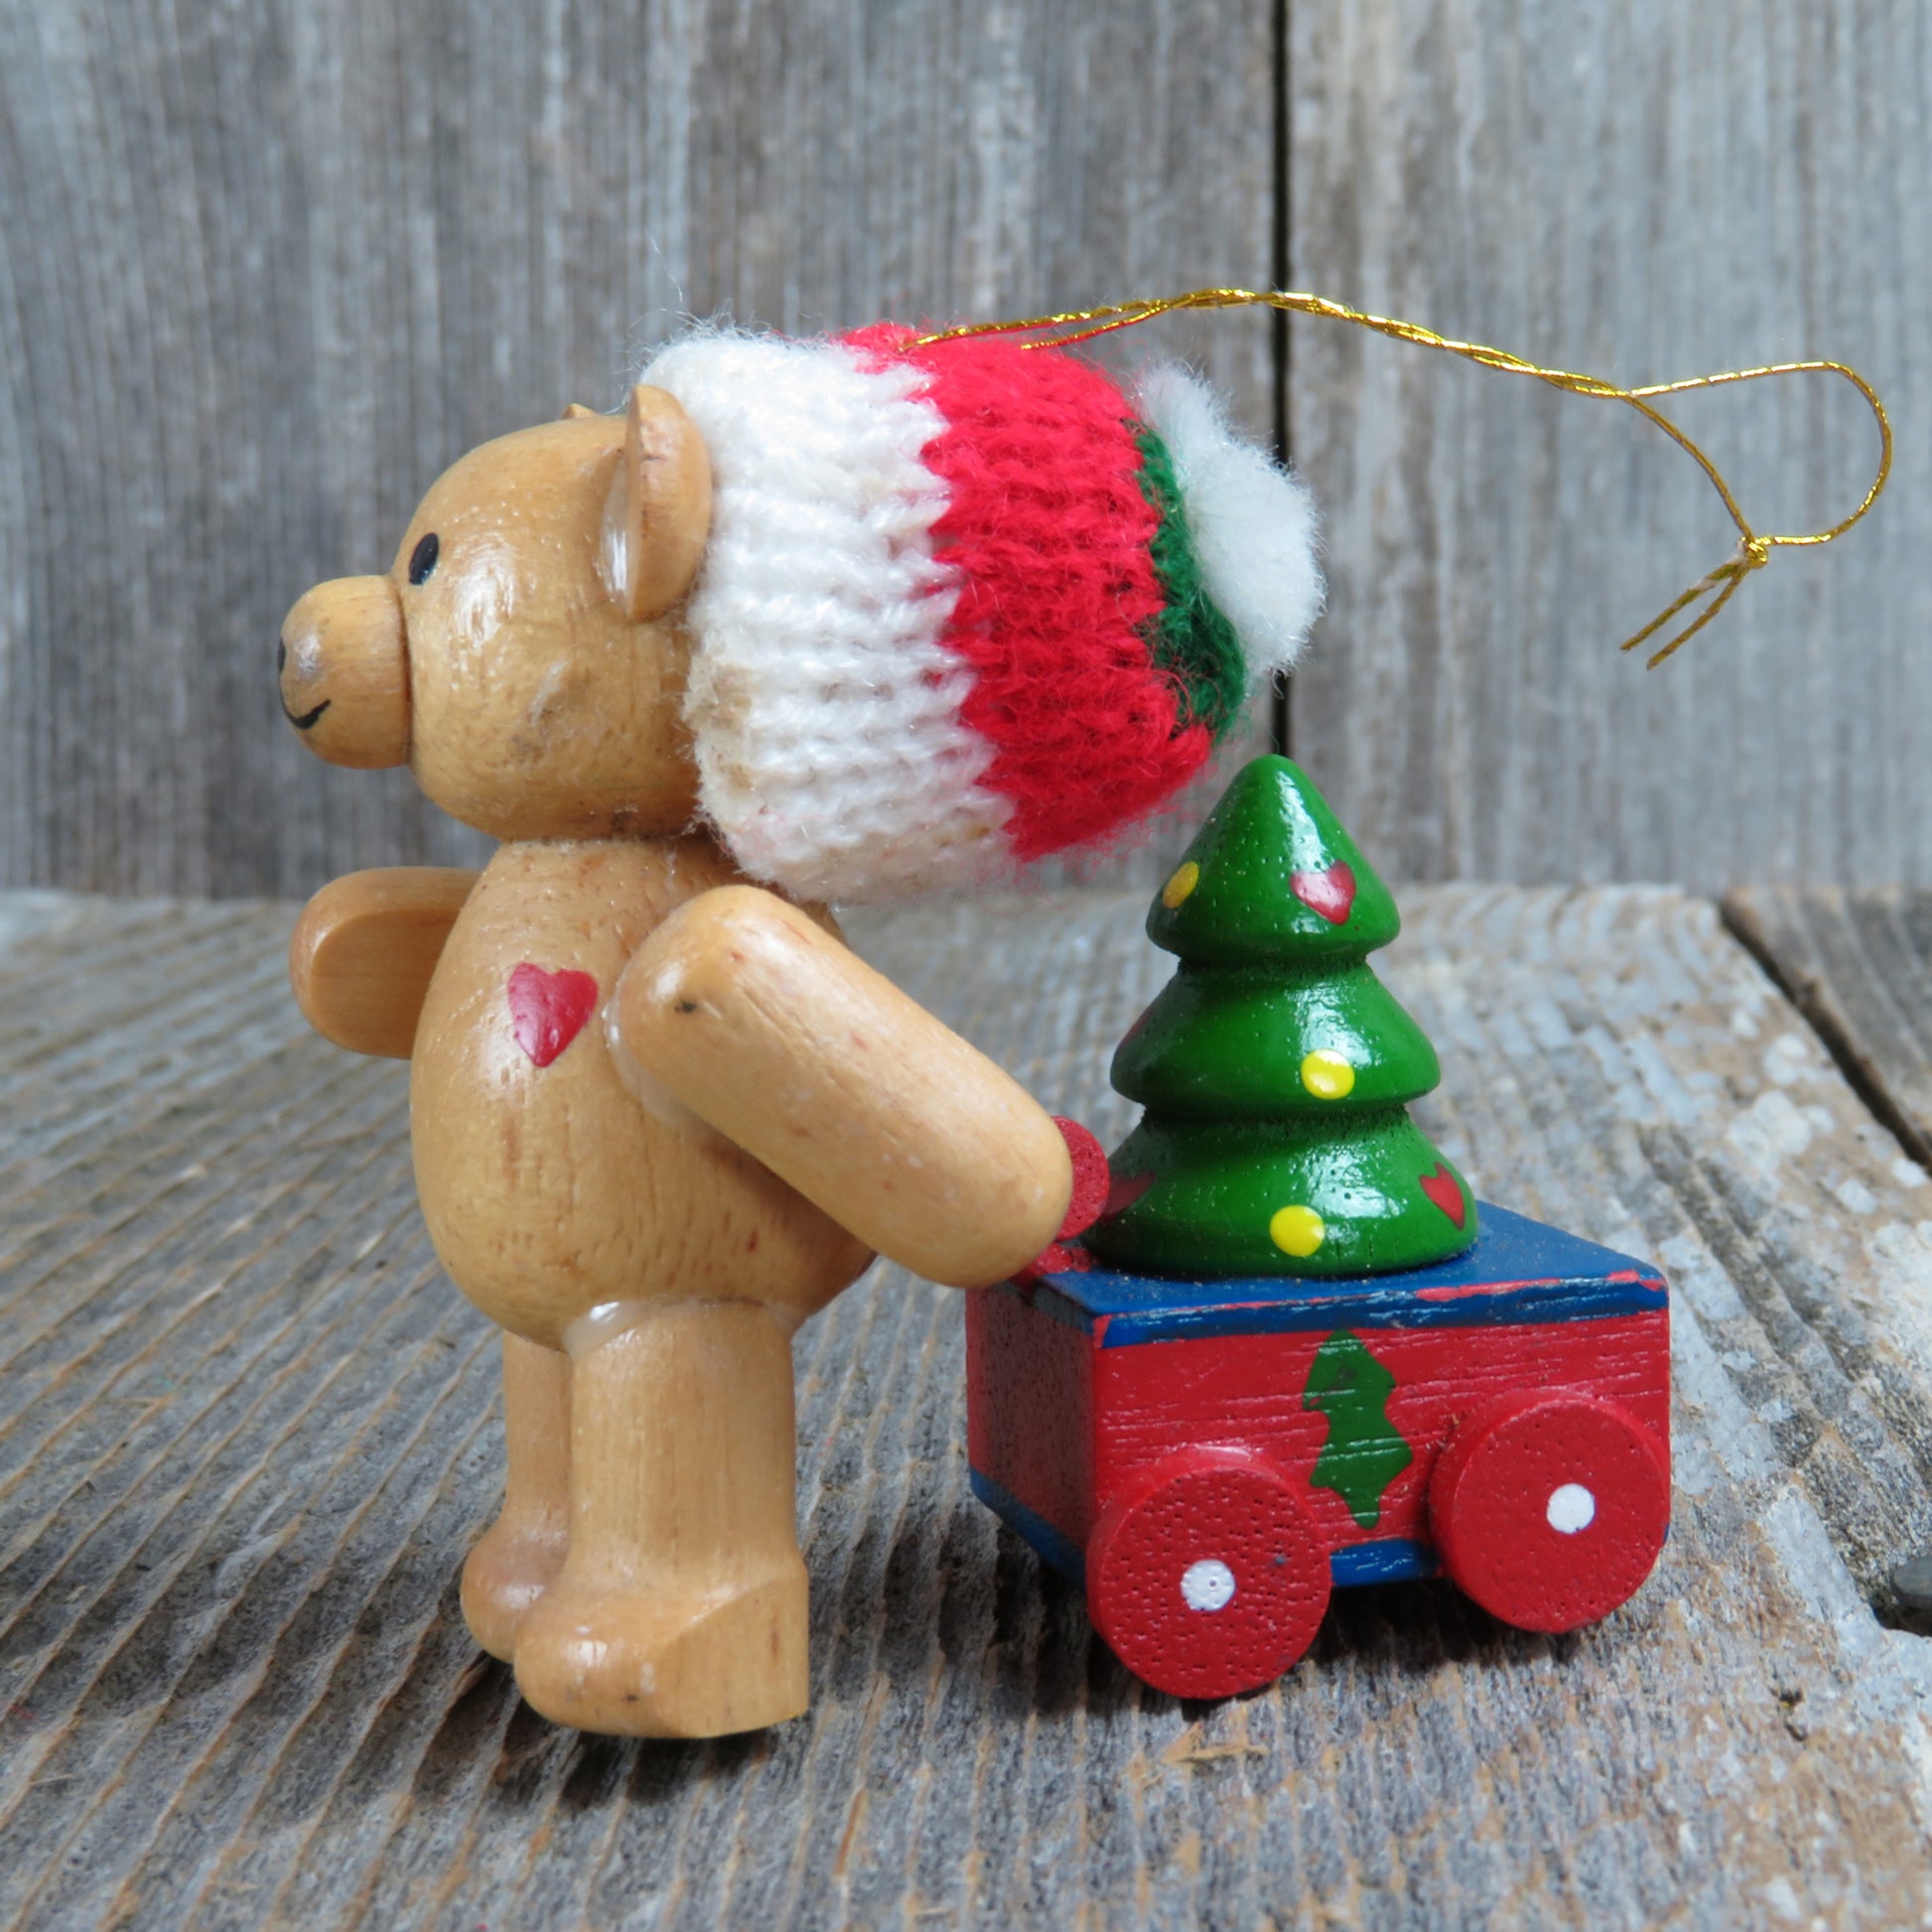 Vintage Teddy Bear with Toy Wagon Wood Christmas Ornament Tree Wooden Knit Hat - At Grandma's Table